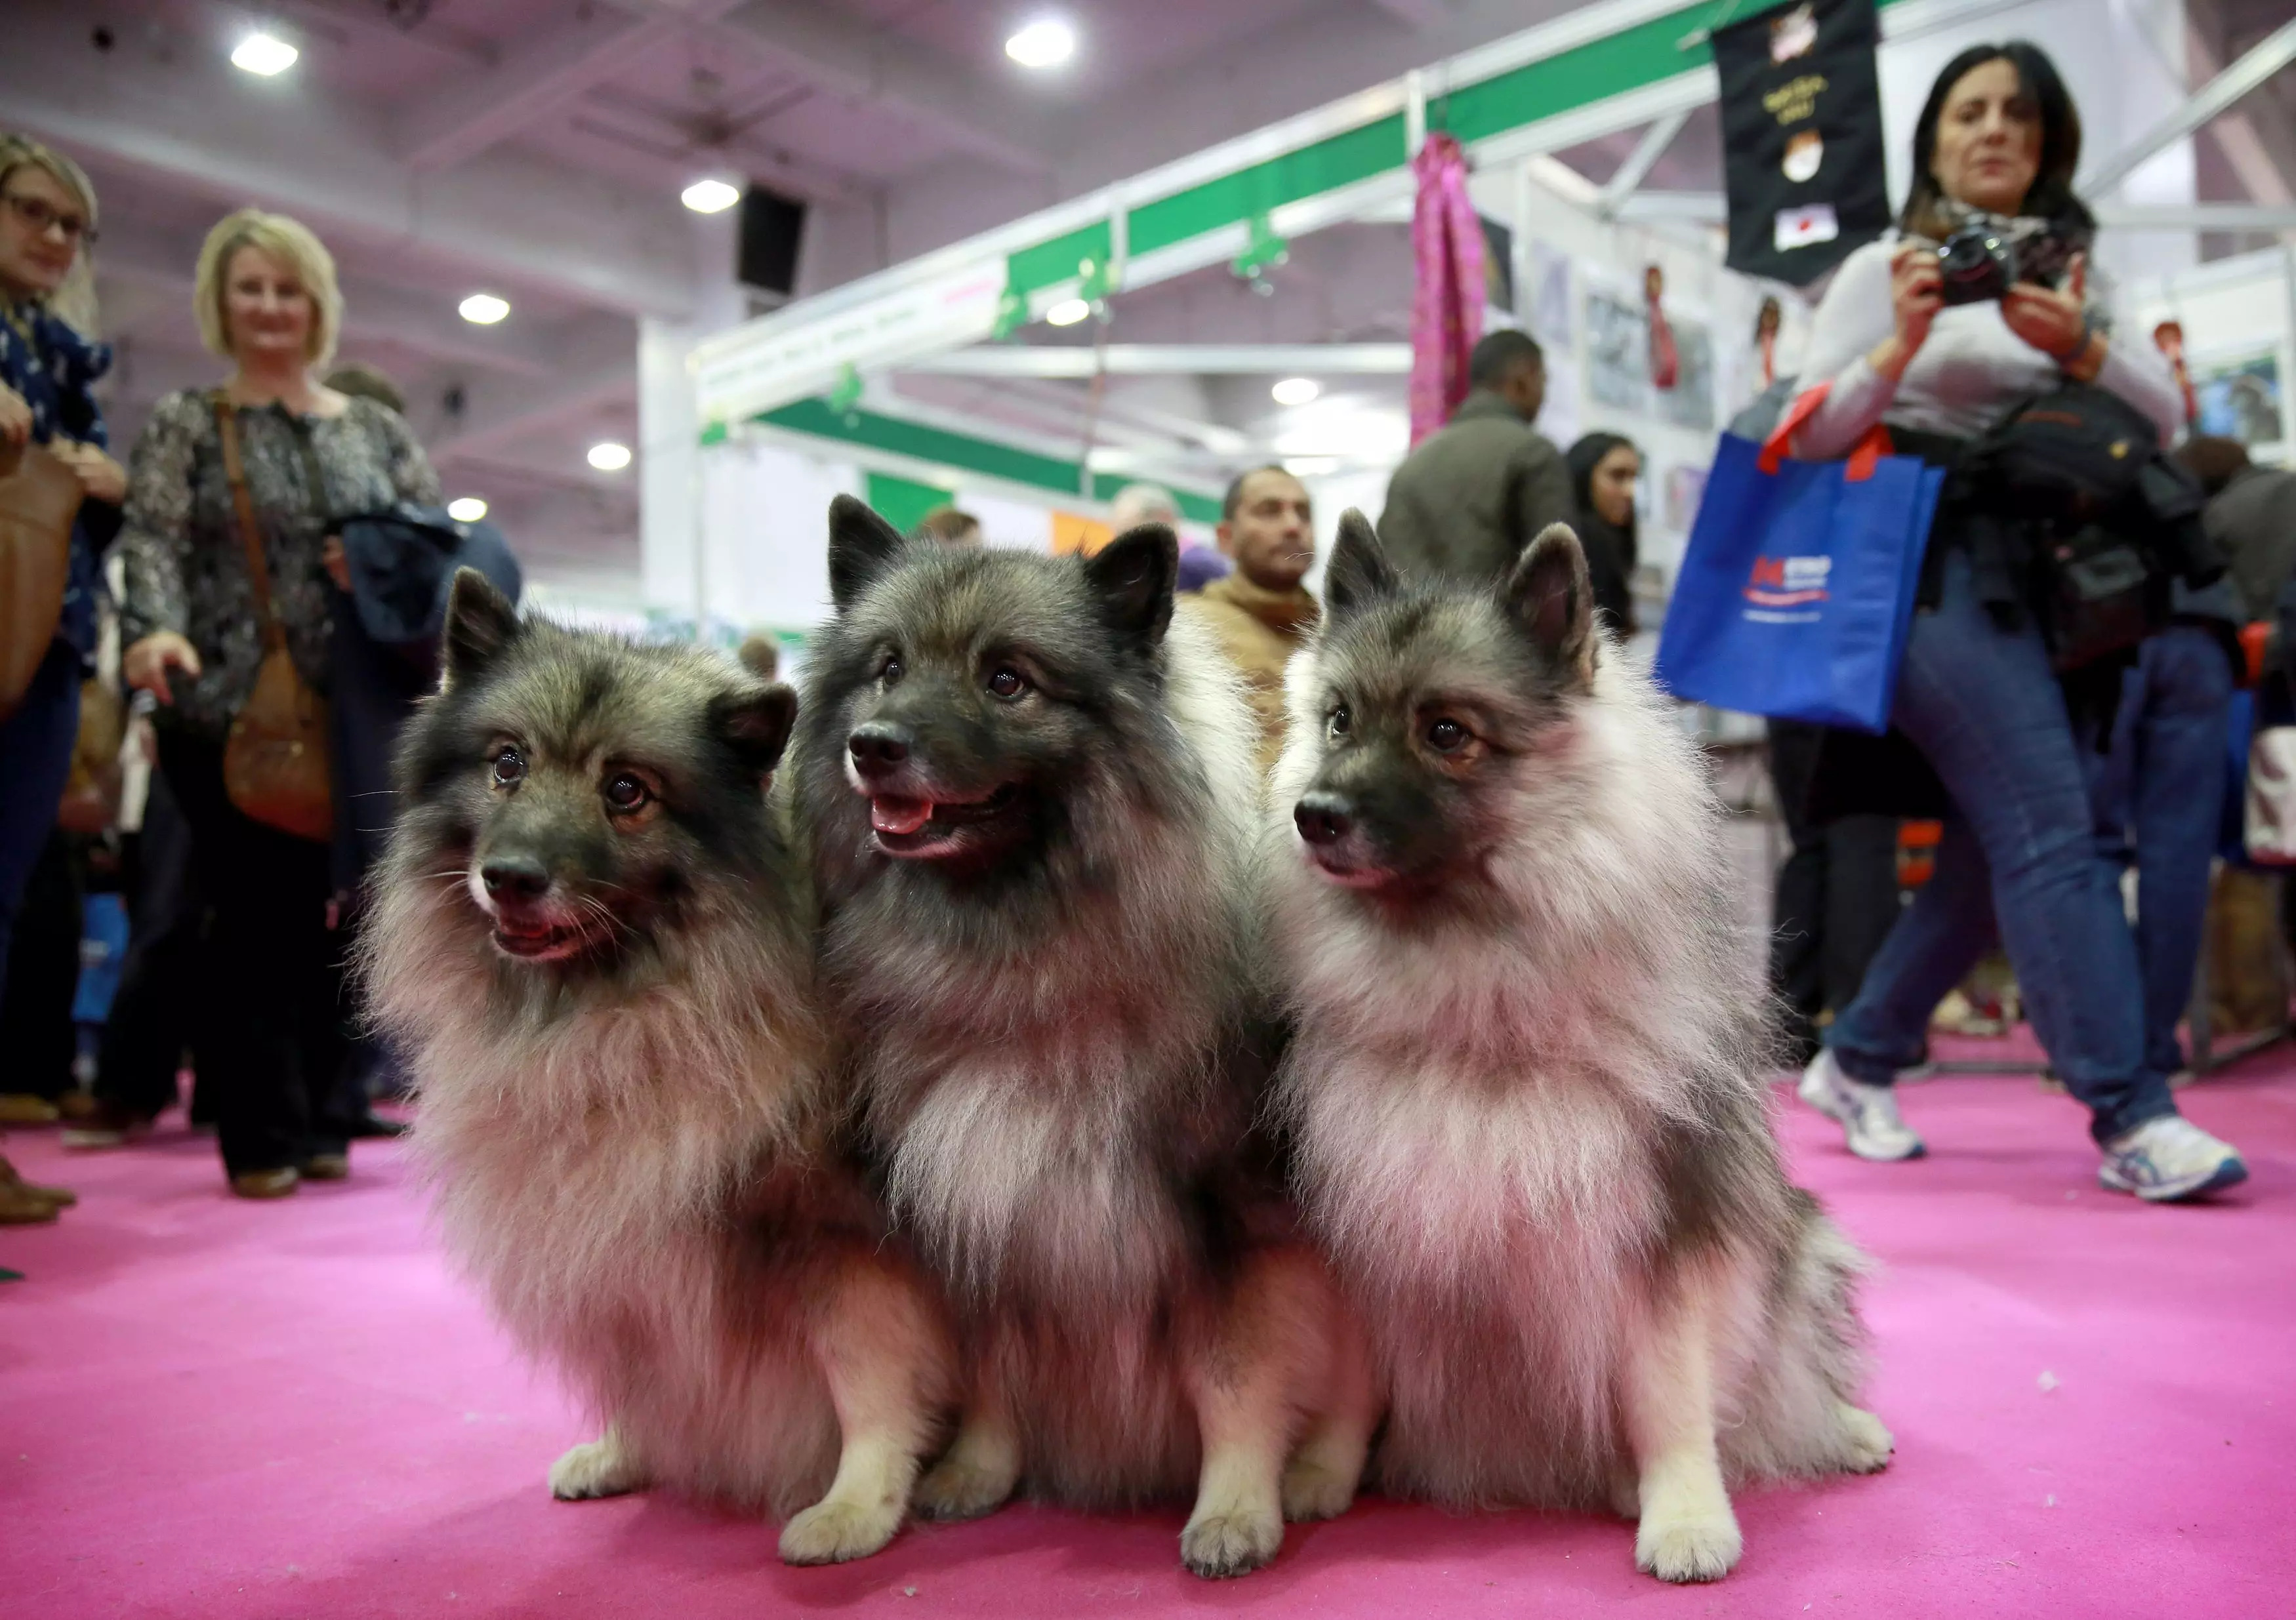 One of the dogs was a Keeshond which, as you can see, are not designed for the heat.